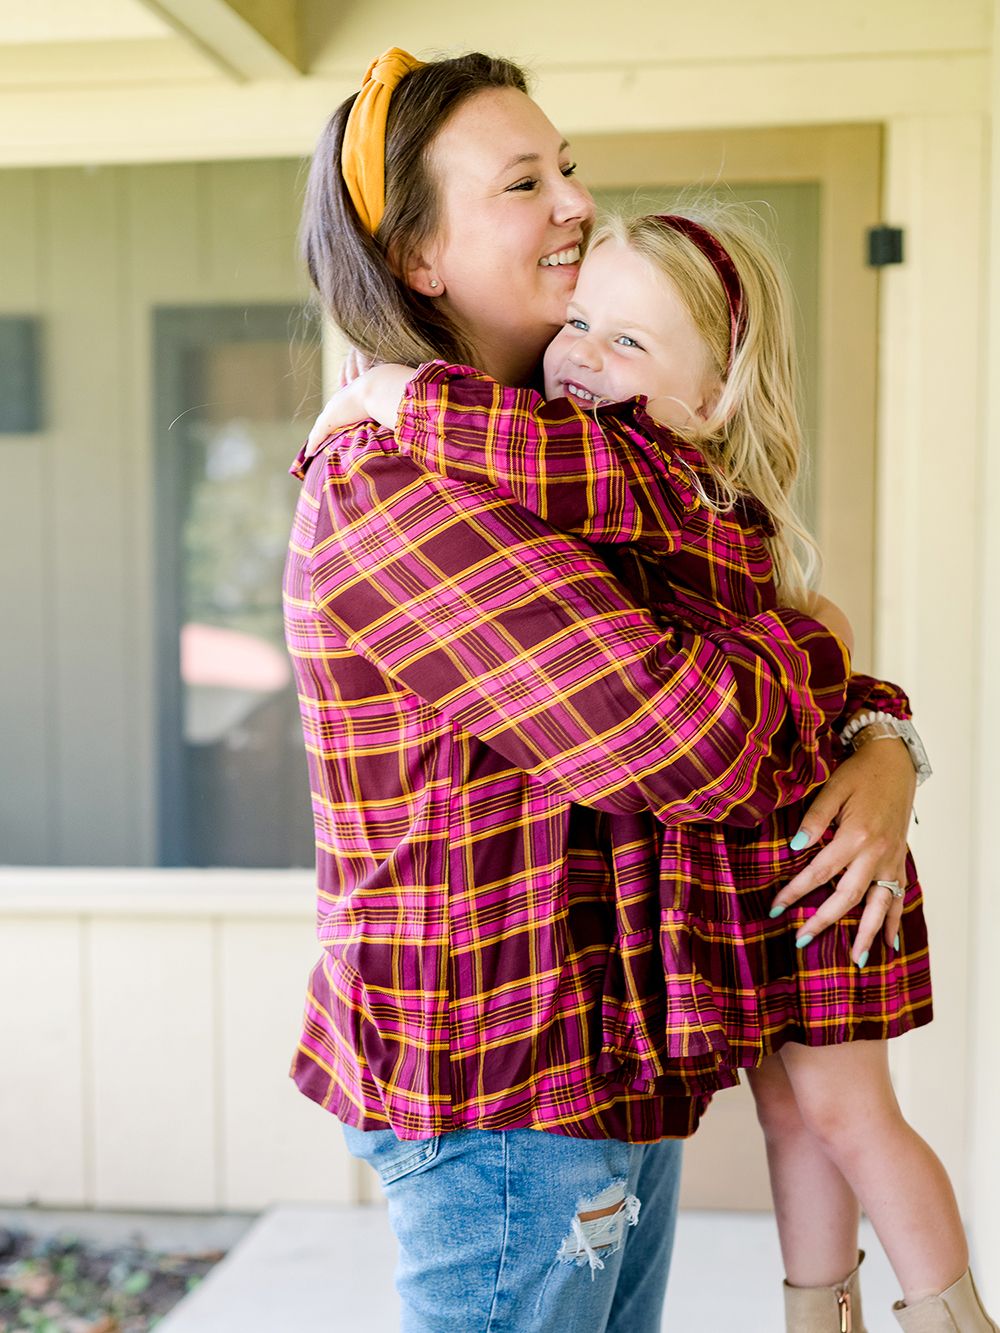 Pioneer Woman's Ree Drummond Models Her Fall Collection With Her Mom